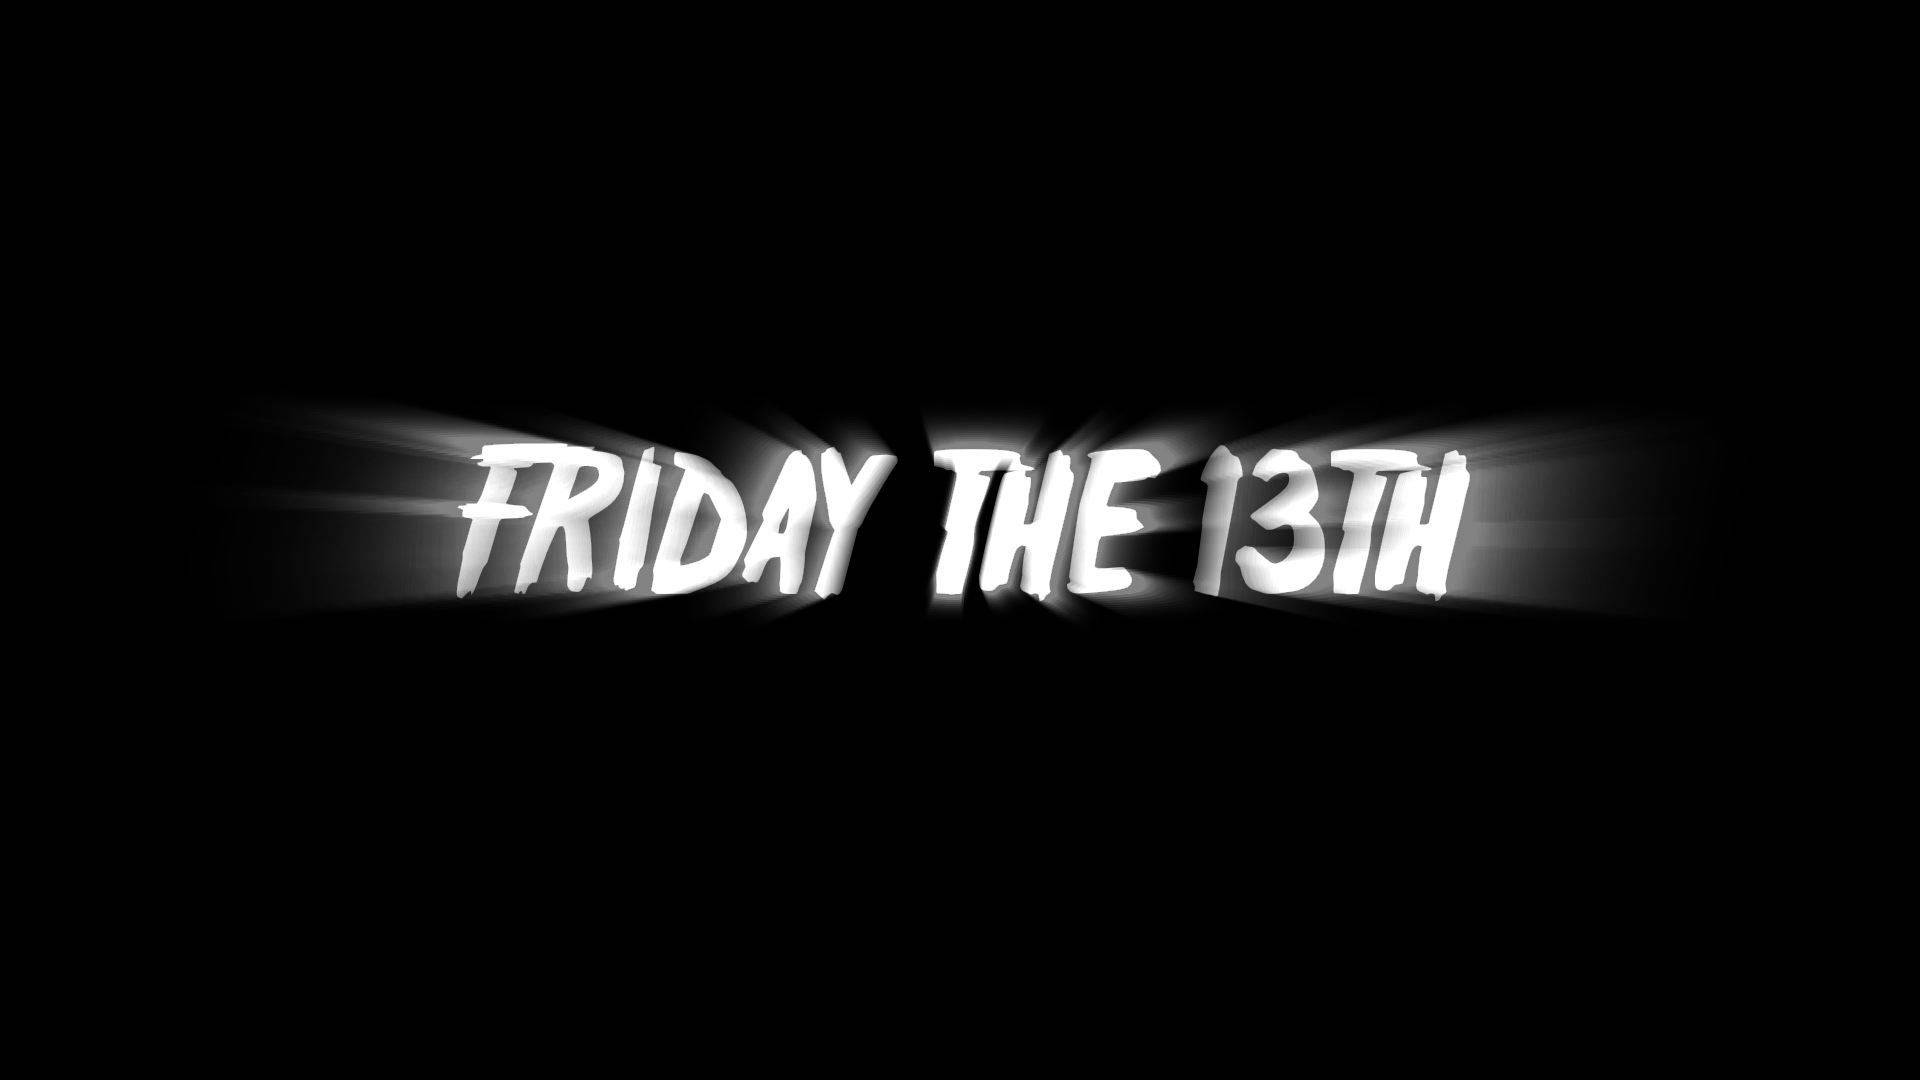 Friday The 13th Glowing Text Wallpaper